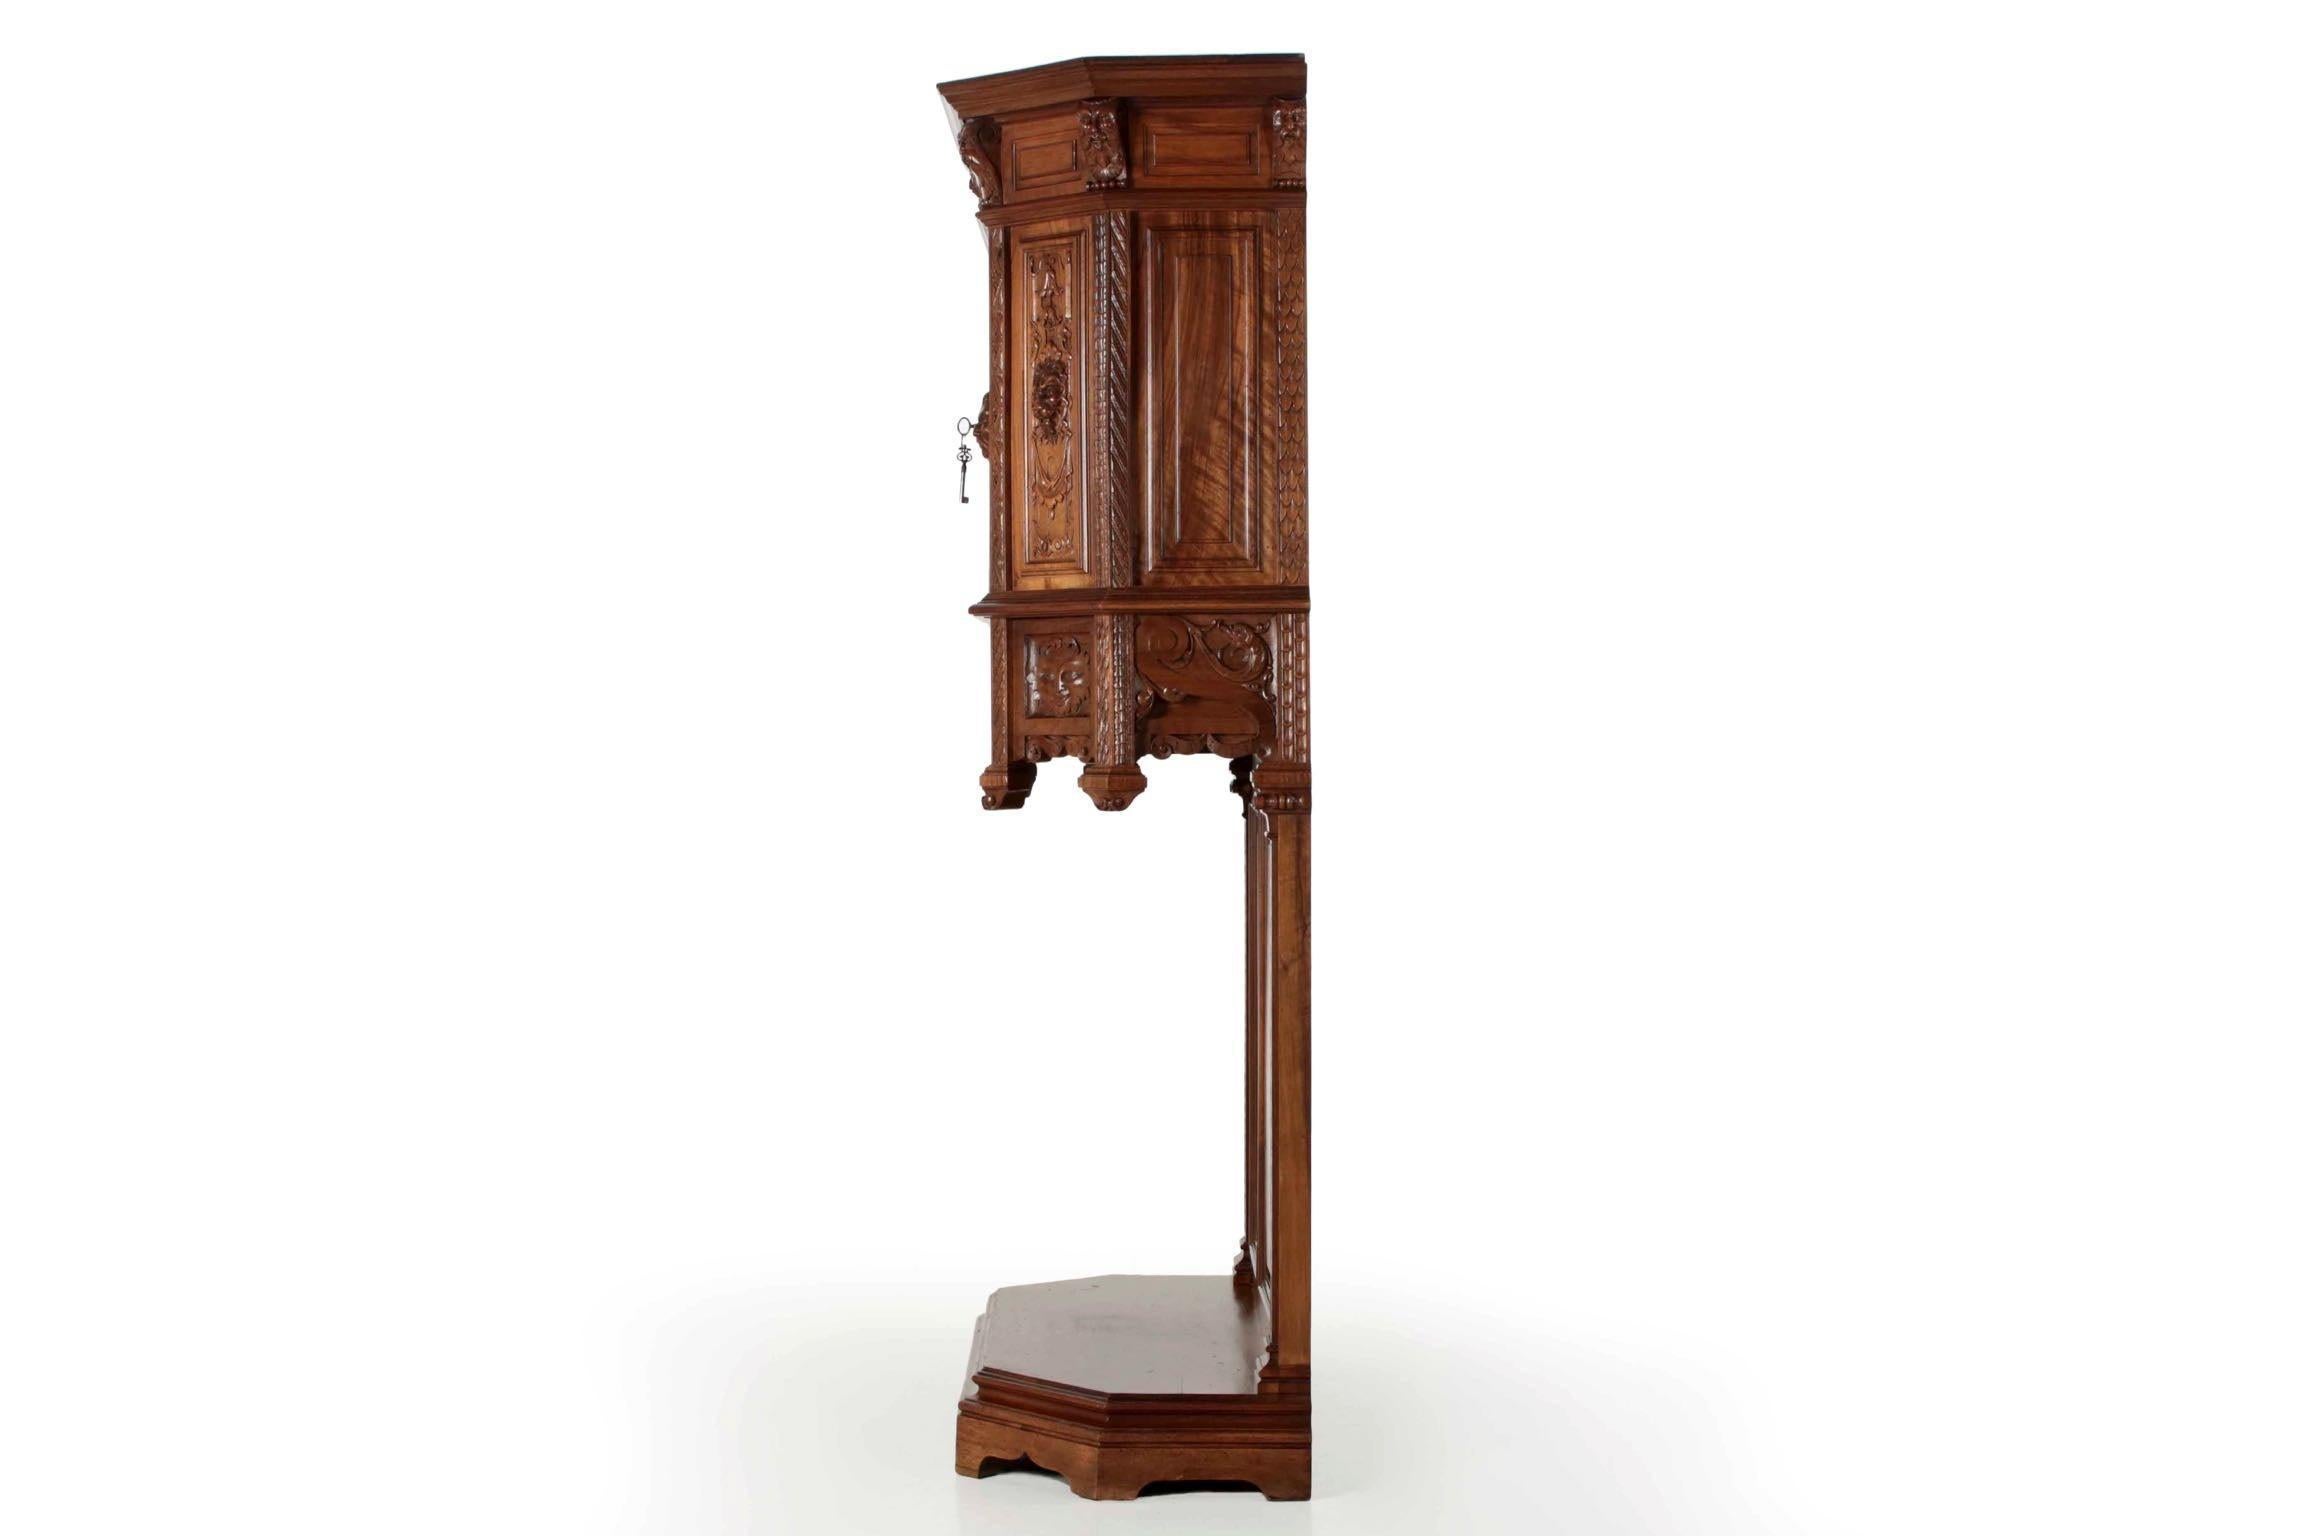 GOTHIC REVIVAL FINELY CARVED WALNUT COURT CUPBOARD
Probably France c. 1880
Item # 704RCA06Q

An exquisitely carved cupboard in the Gothic Revival taste, crafted in France during the last quarter of the 19th century, the cabinet is noteworthy for